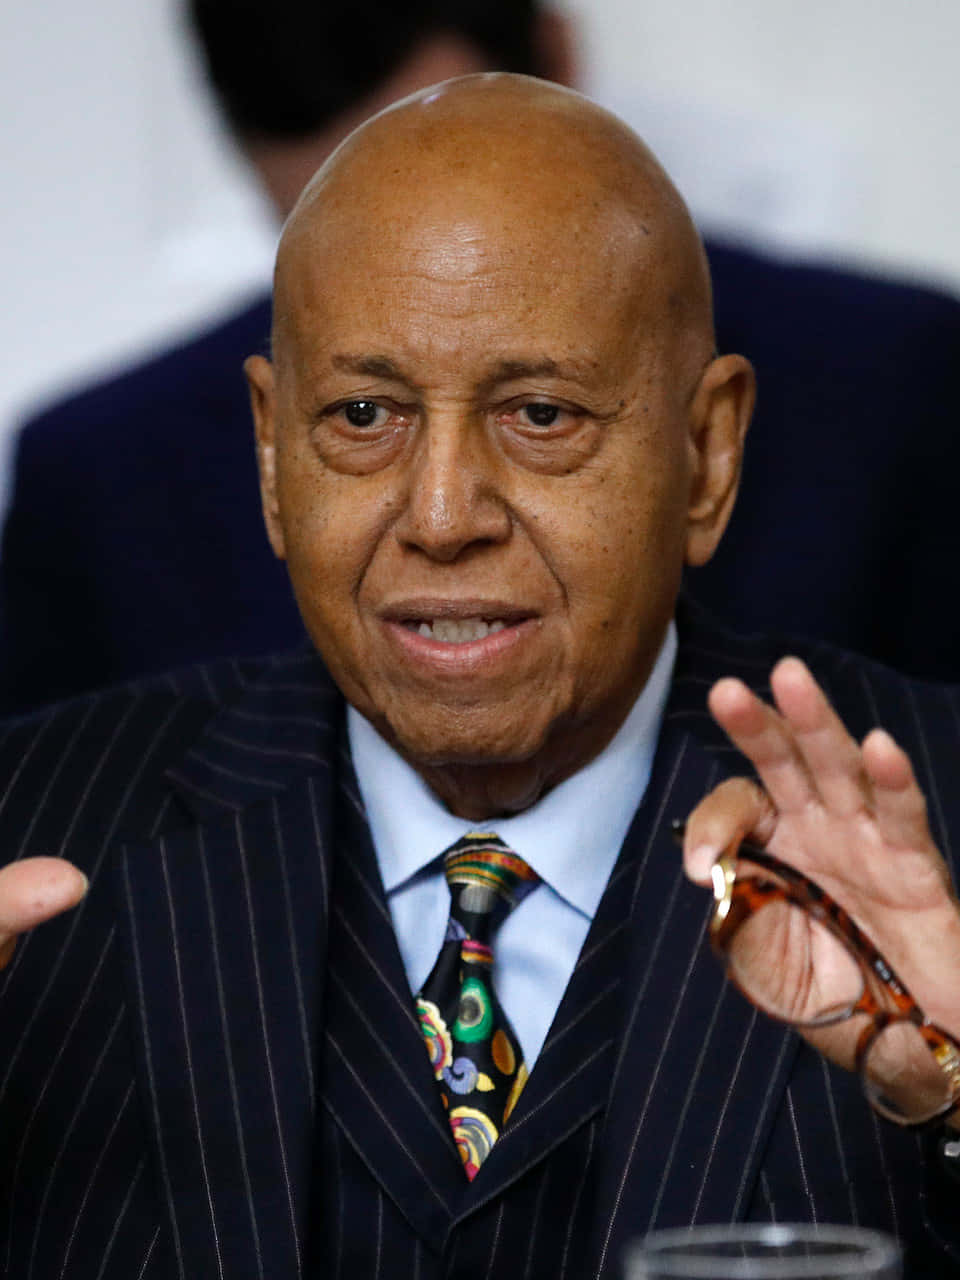 Honorable Alcee Hastings Posing with Glasses in Hand Wallpaper